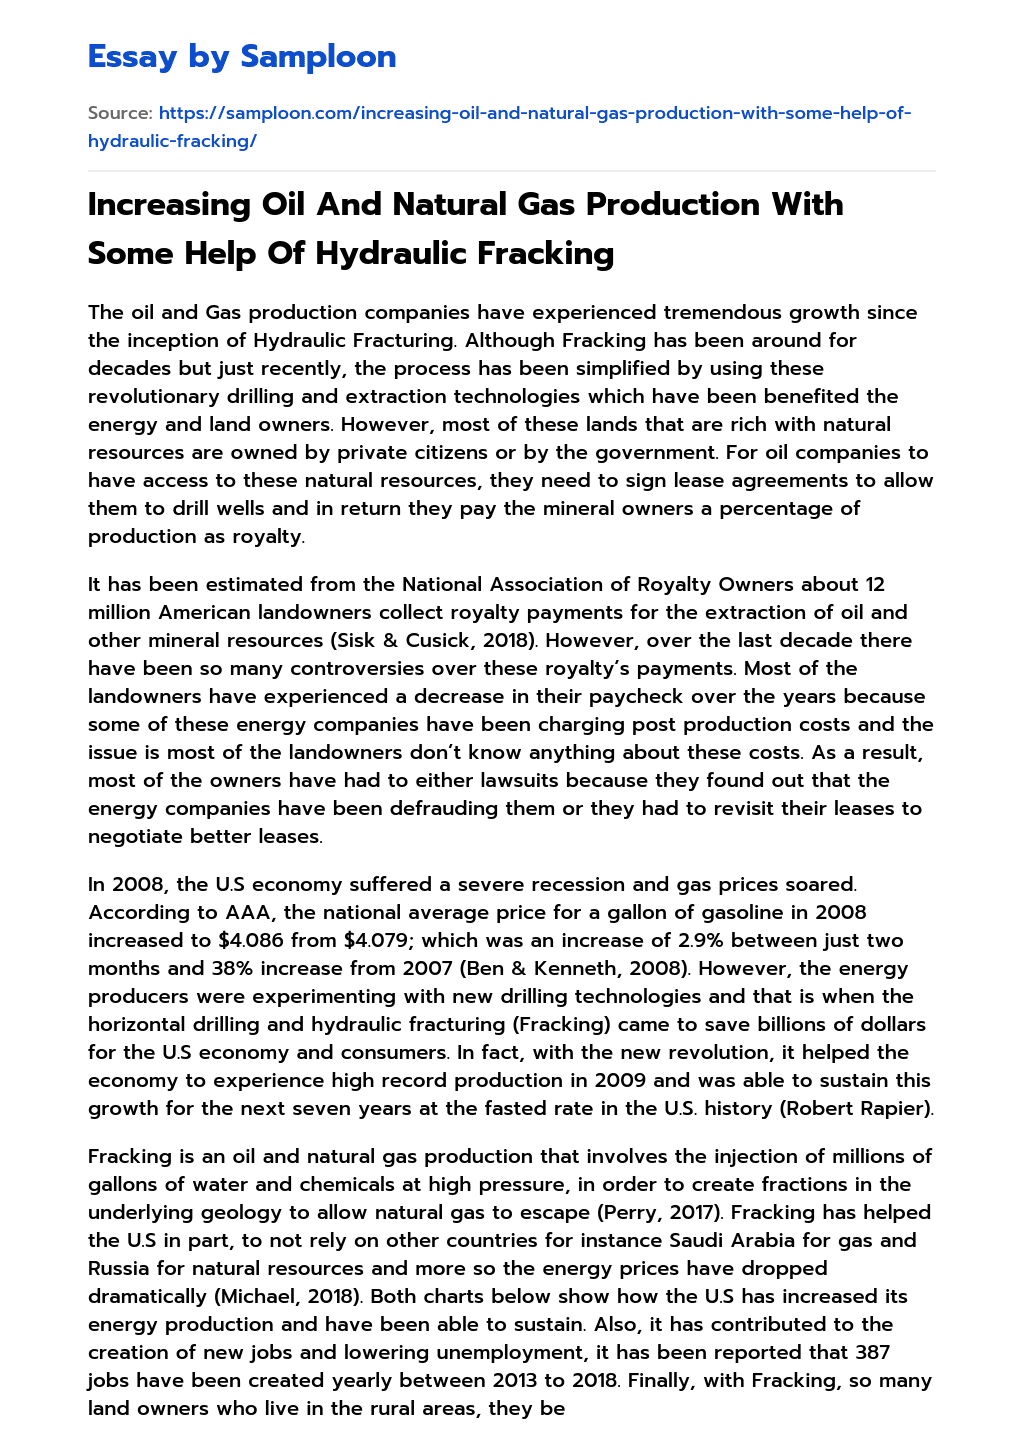 Increasing Oil And Natural Gas Production With Some Help Of Hydraulic Fracking essay